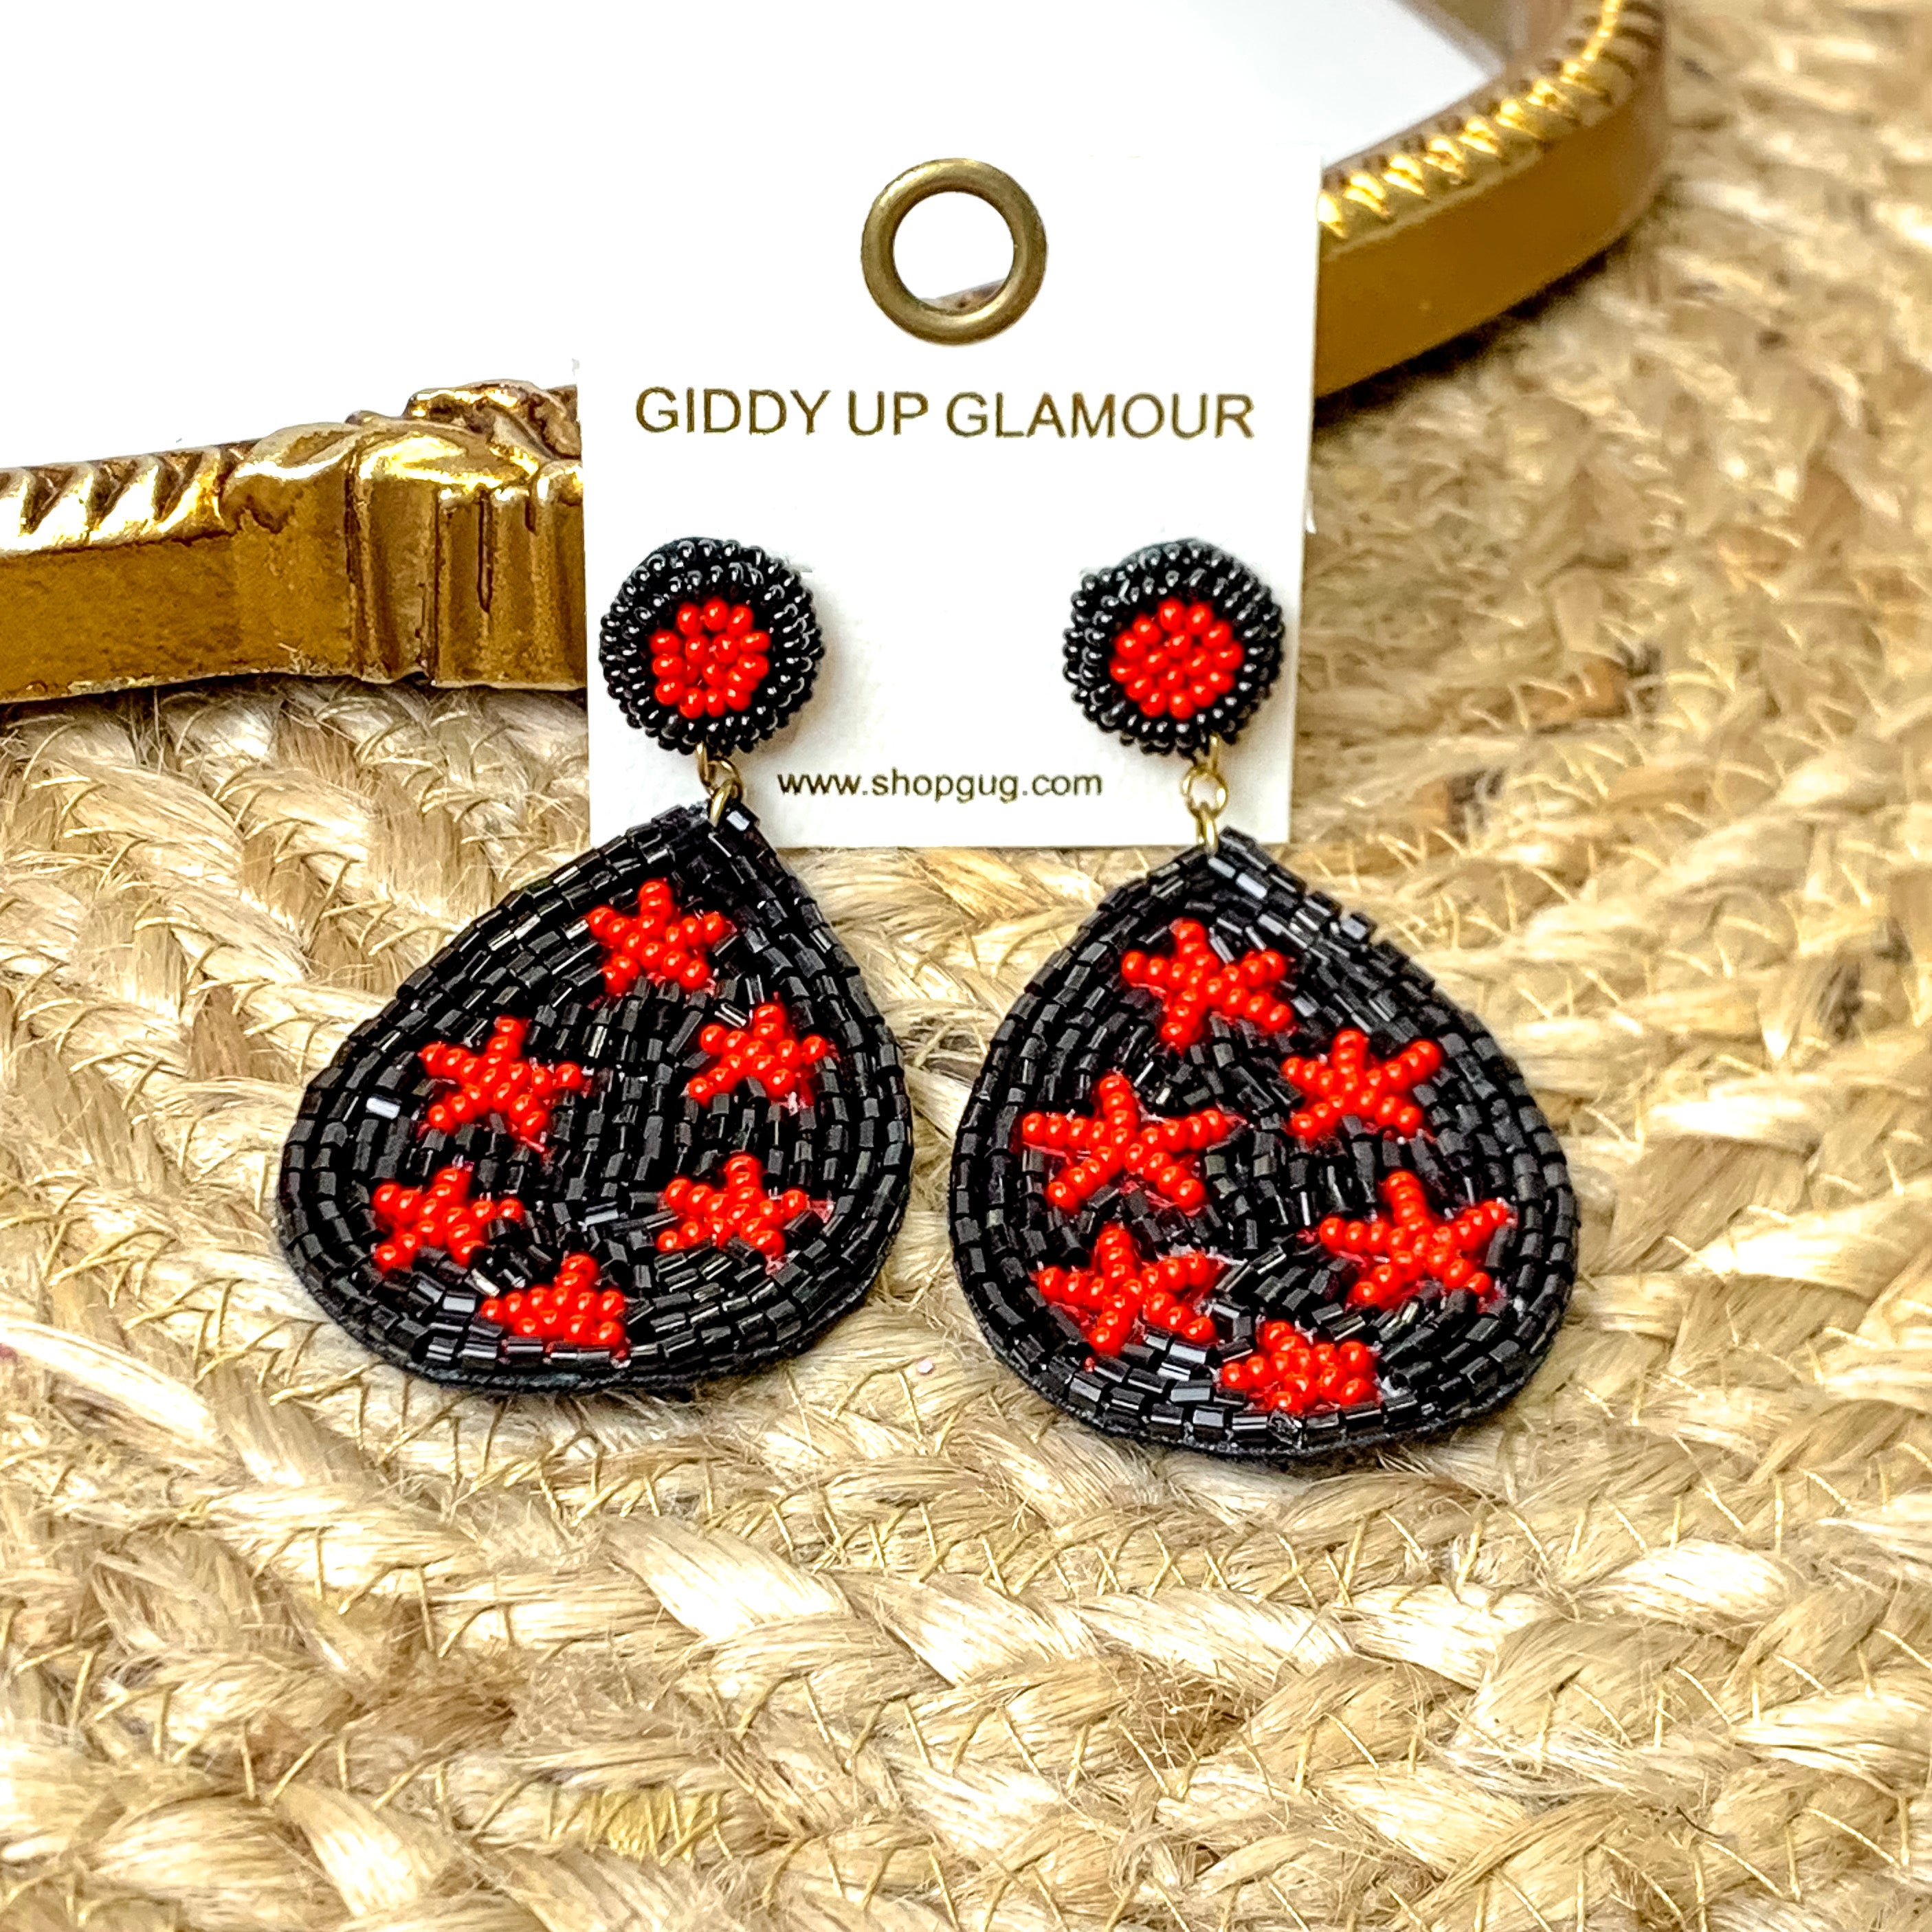 Beaded Teardrop Dangle Earrings with Stars in Black and Red - Giddy Up Glamour Boutique